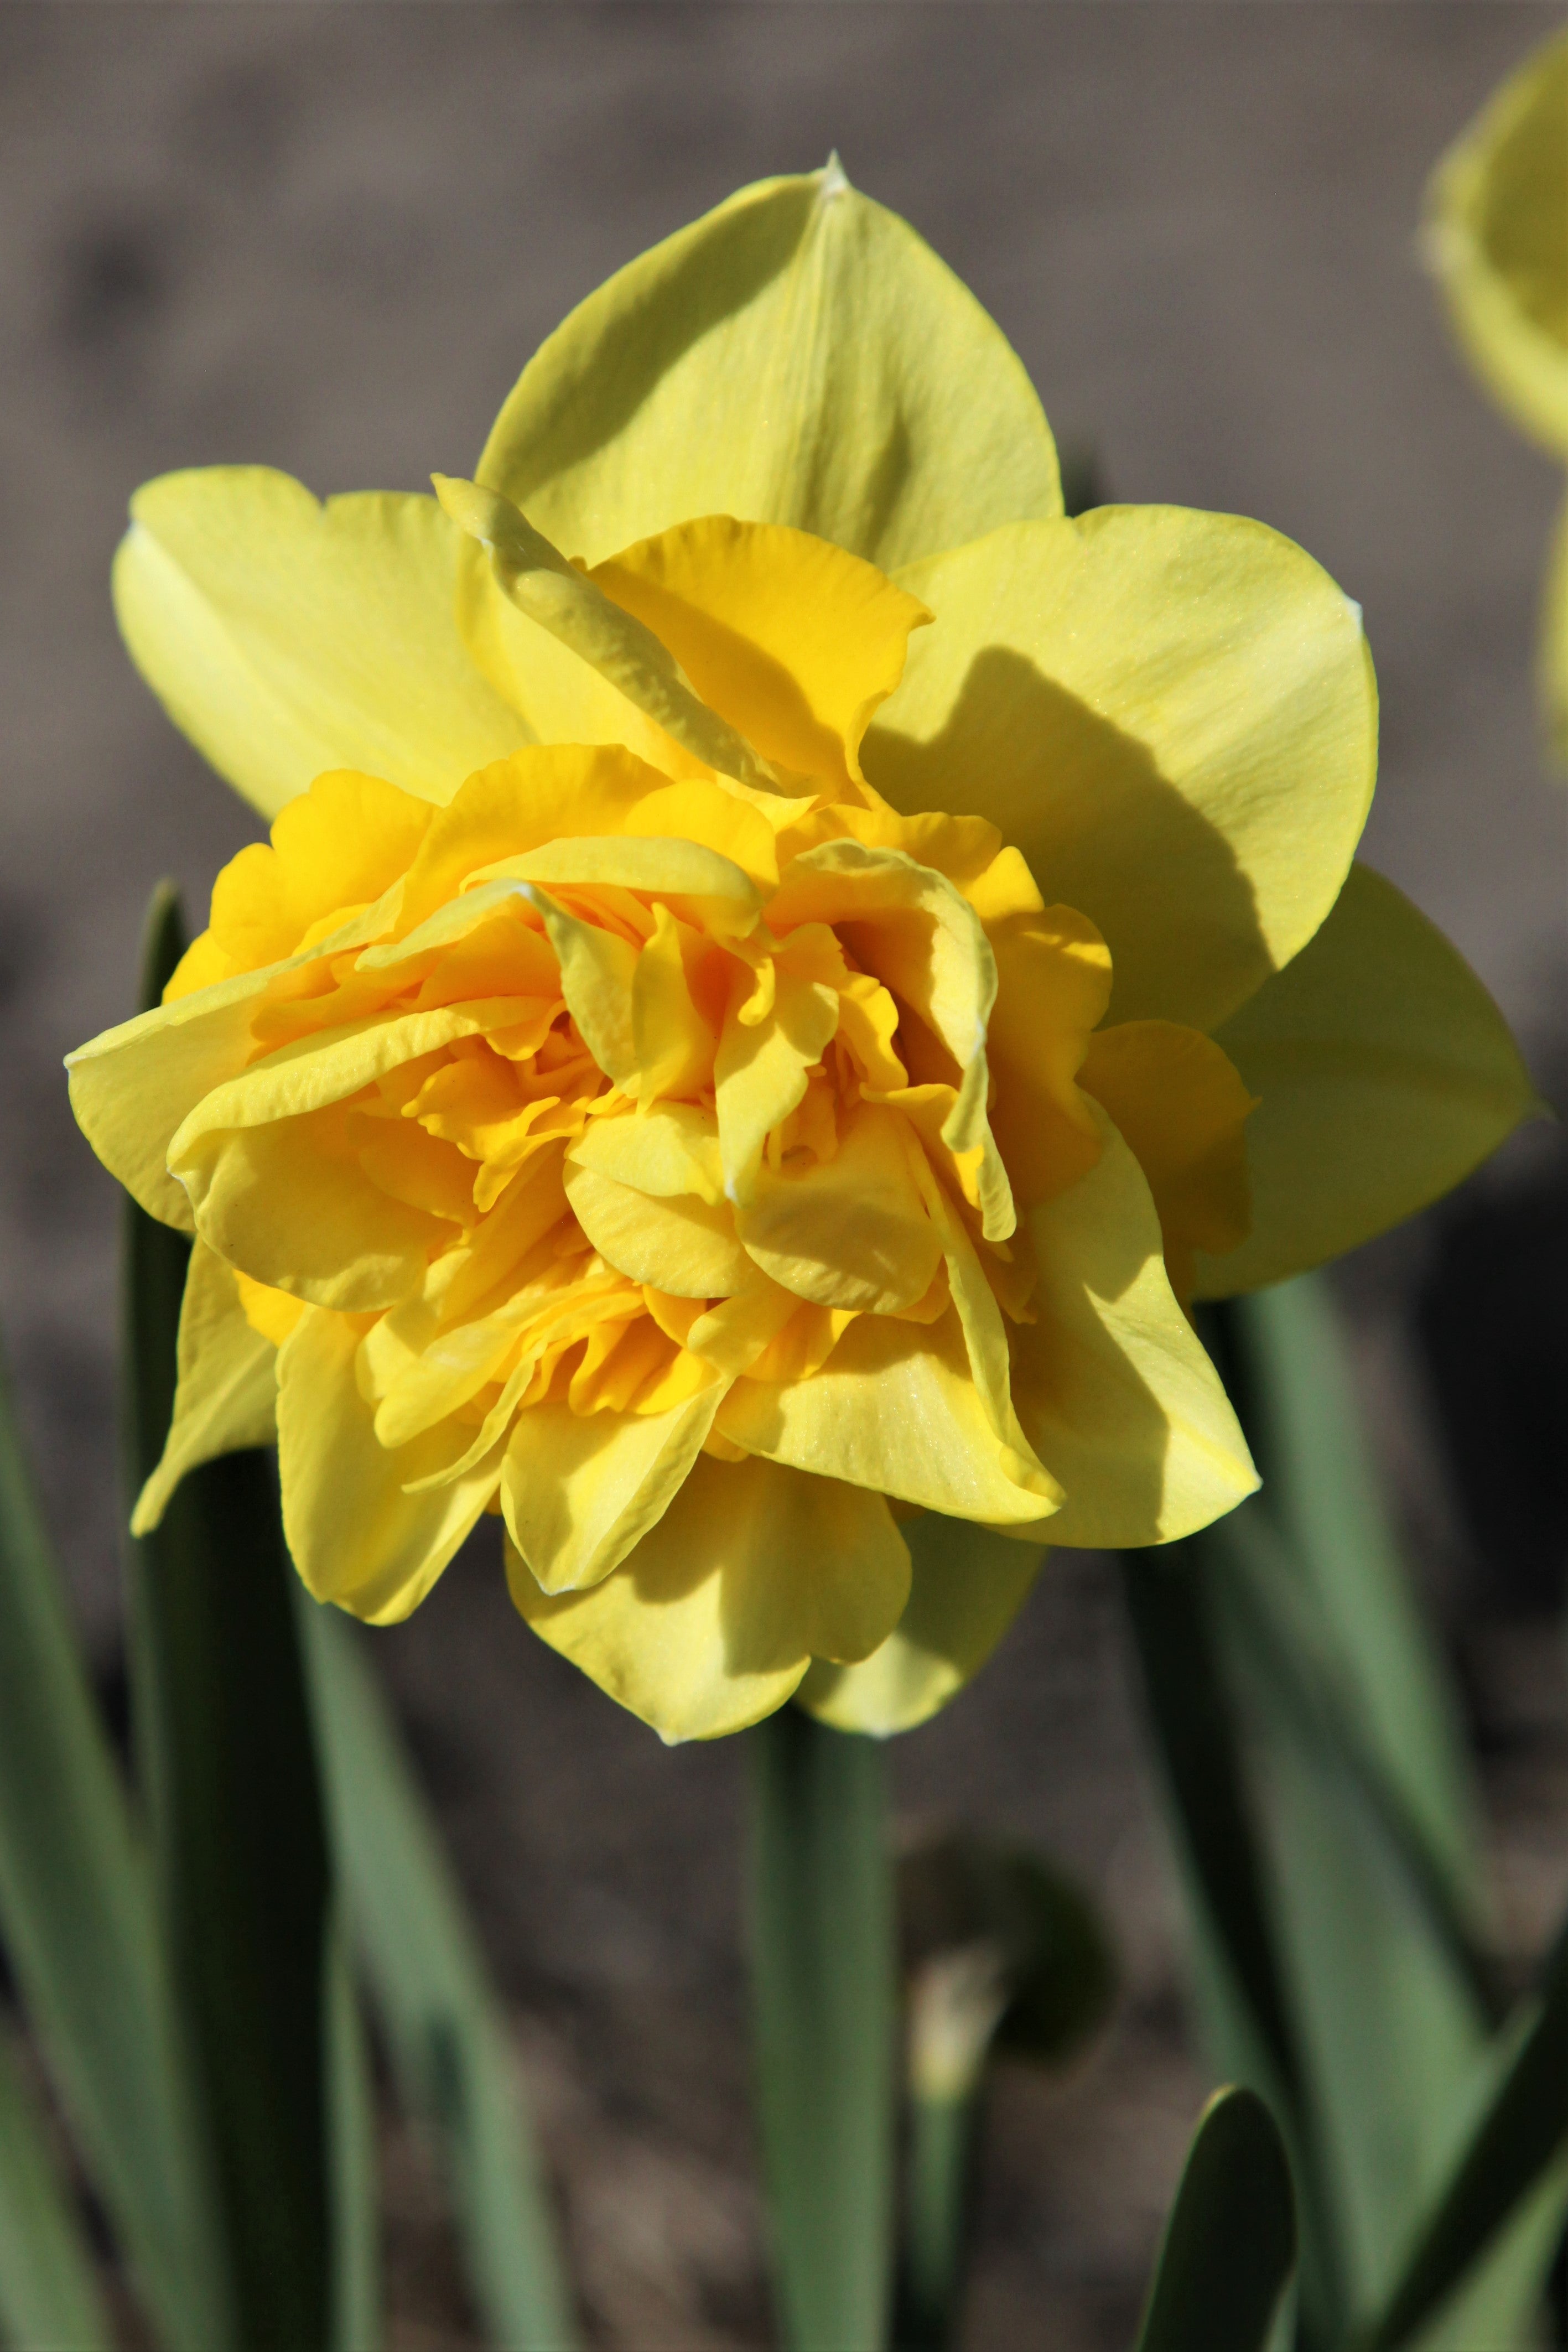 Close-up of Daffodil dick wilden with yellow-orange petals